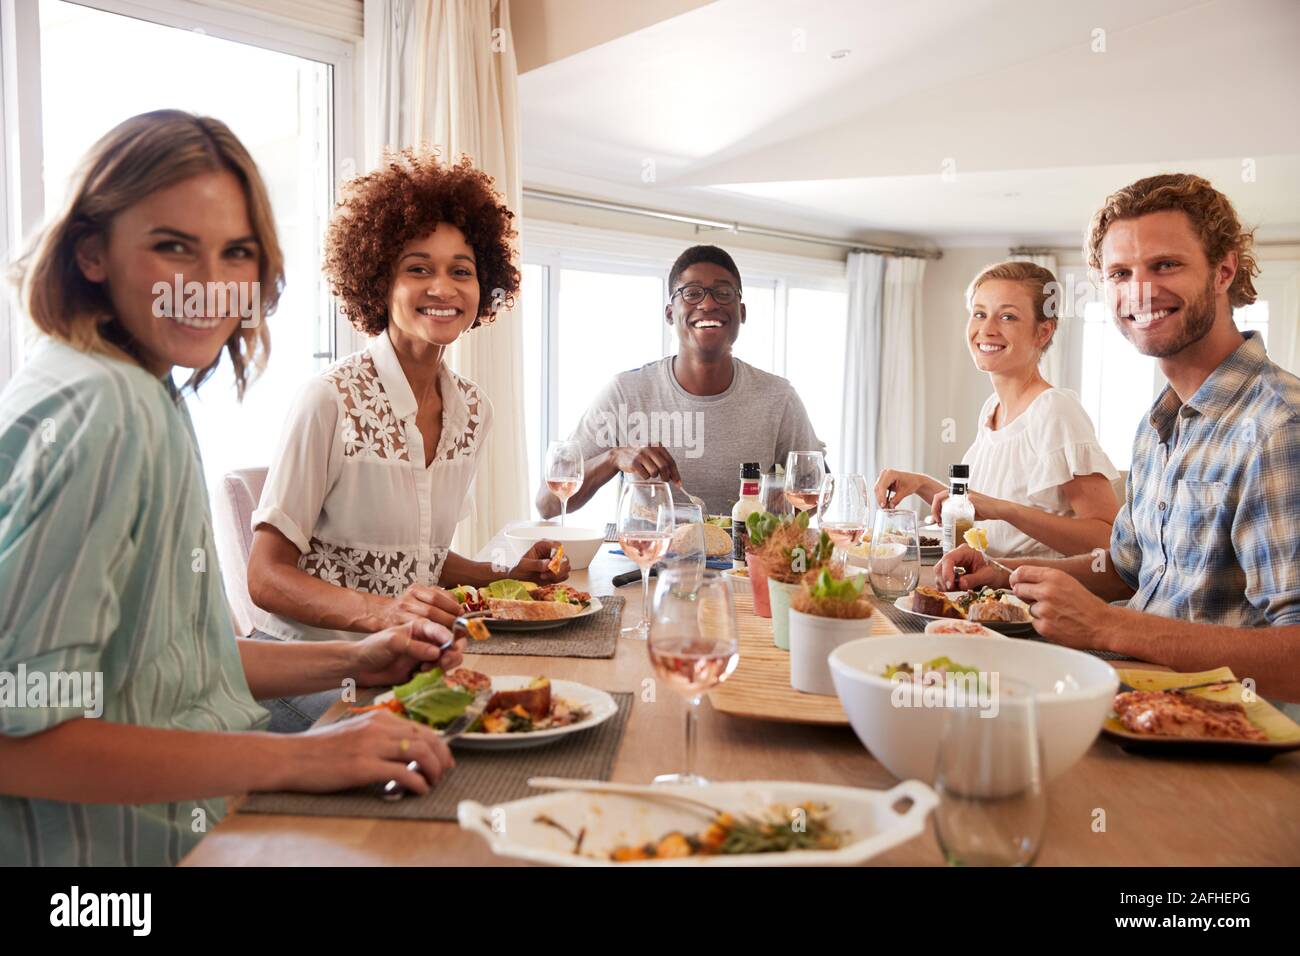 A group of millennial friends sitting at a table eating lunch, looking to camera, backlit Stock Photo